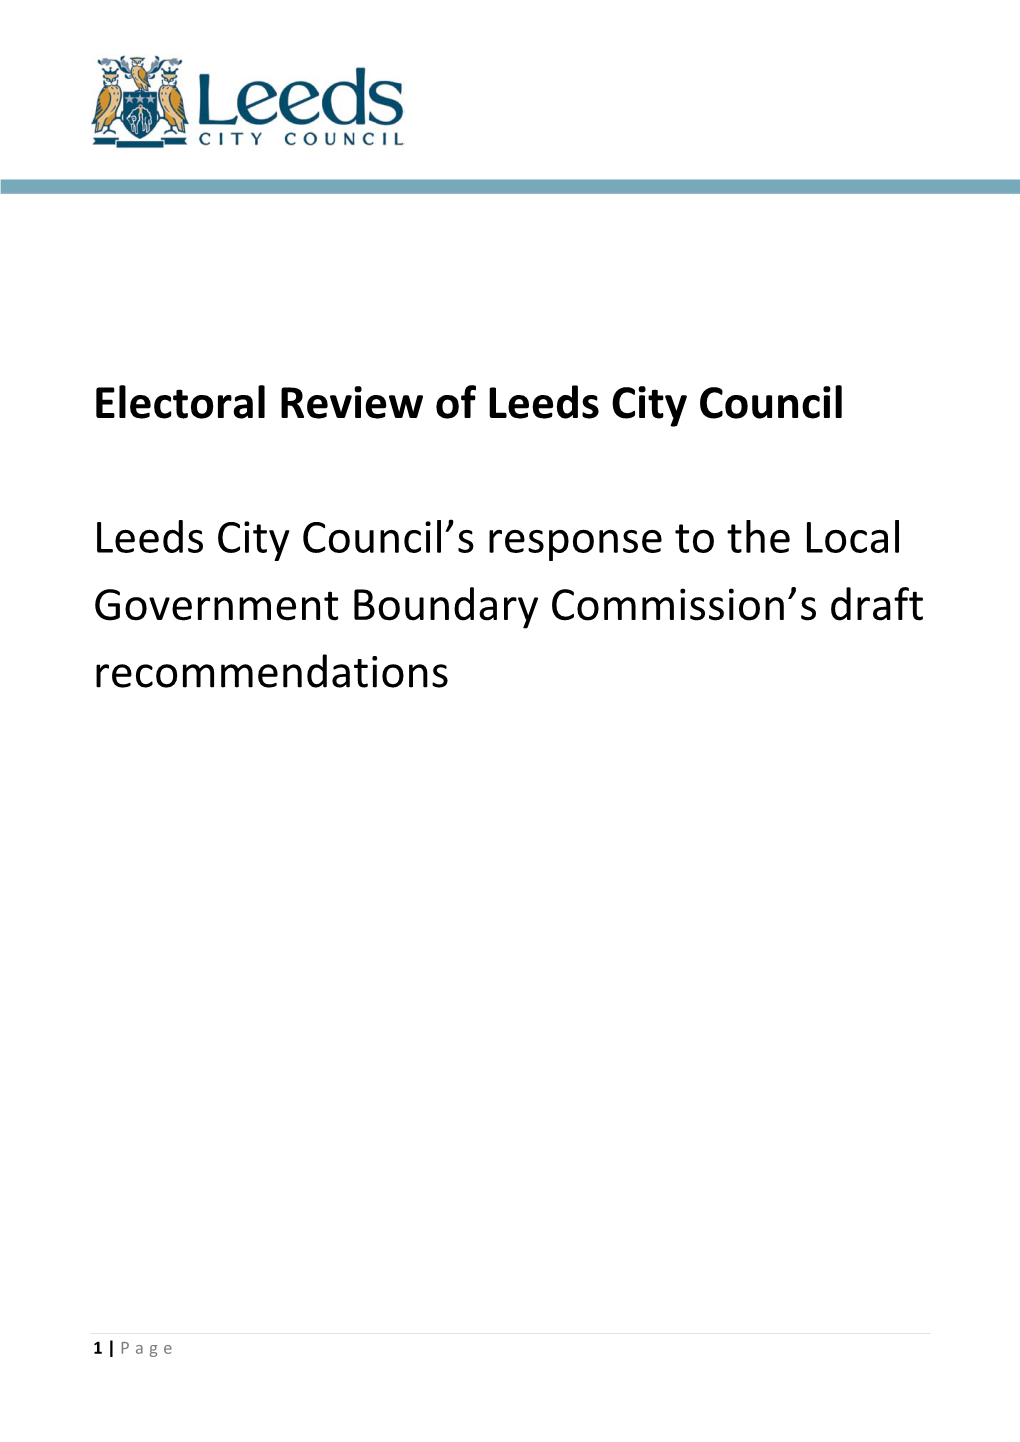 Electoral Review of Leeds City Council